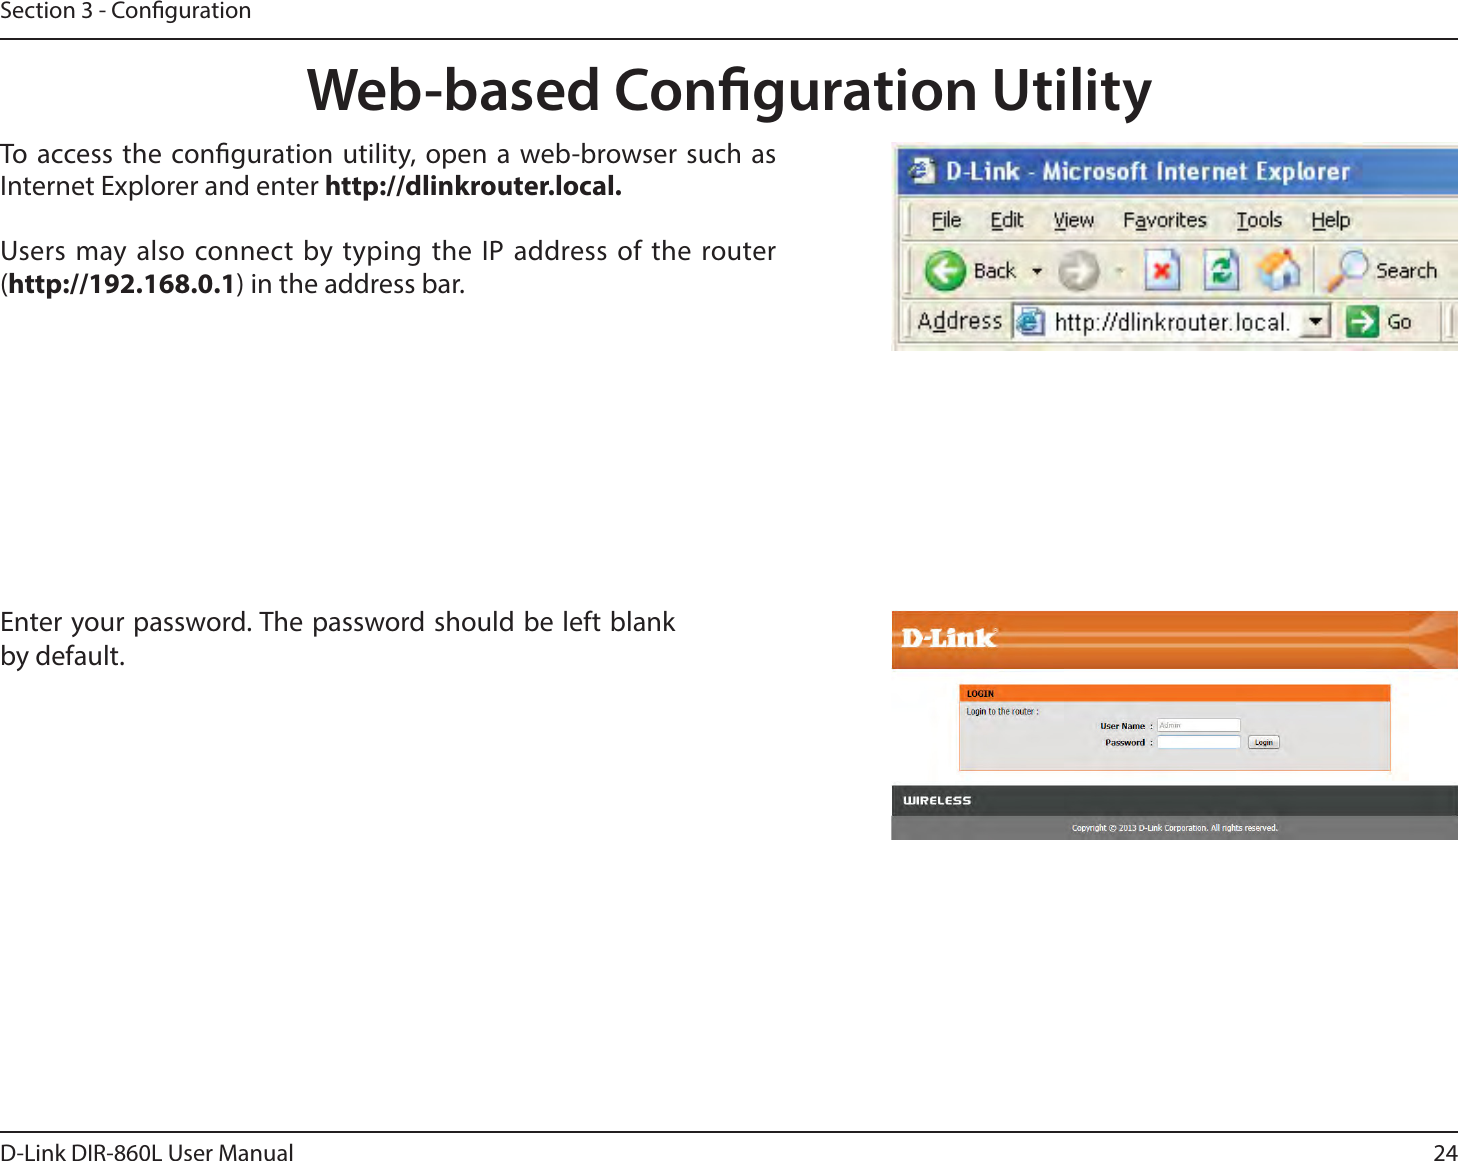 24D-Link DIR-860L User ManualSection 3 - CongurationWeb-based Conguration UtilityEnter your password. The password should be left blank by default.To access the conguration utility, open a web-browser such as Internet Explorer and enter IUUQEMJOLSPVUFSMPDBMUsers may also connect by typing the IP address of the router (IUUQ) in the address bar.